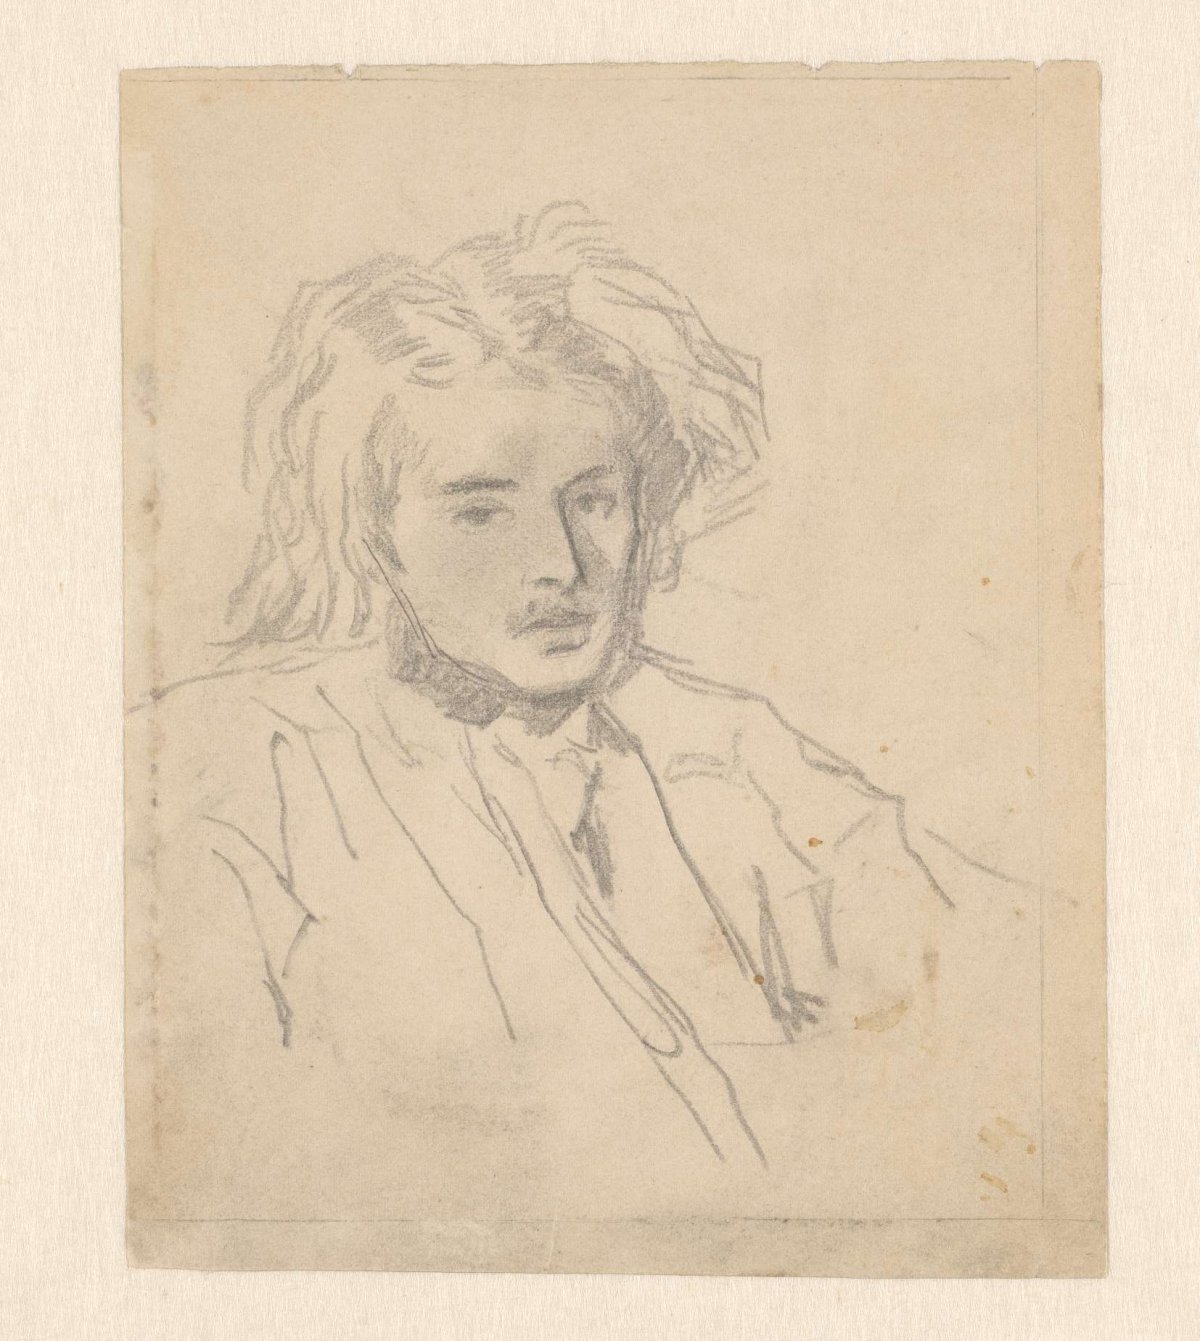 Portrait study of a young man with wild hair, Matthijs Maris, after 1849 - before 1917